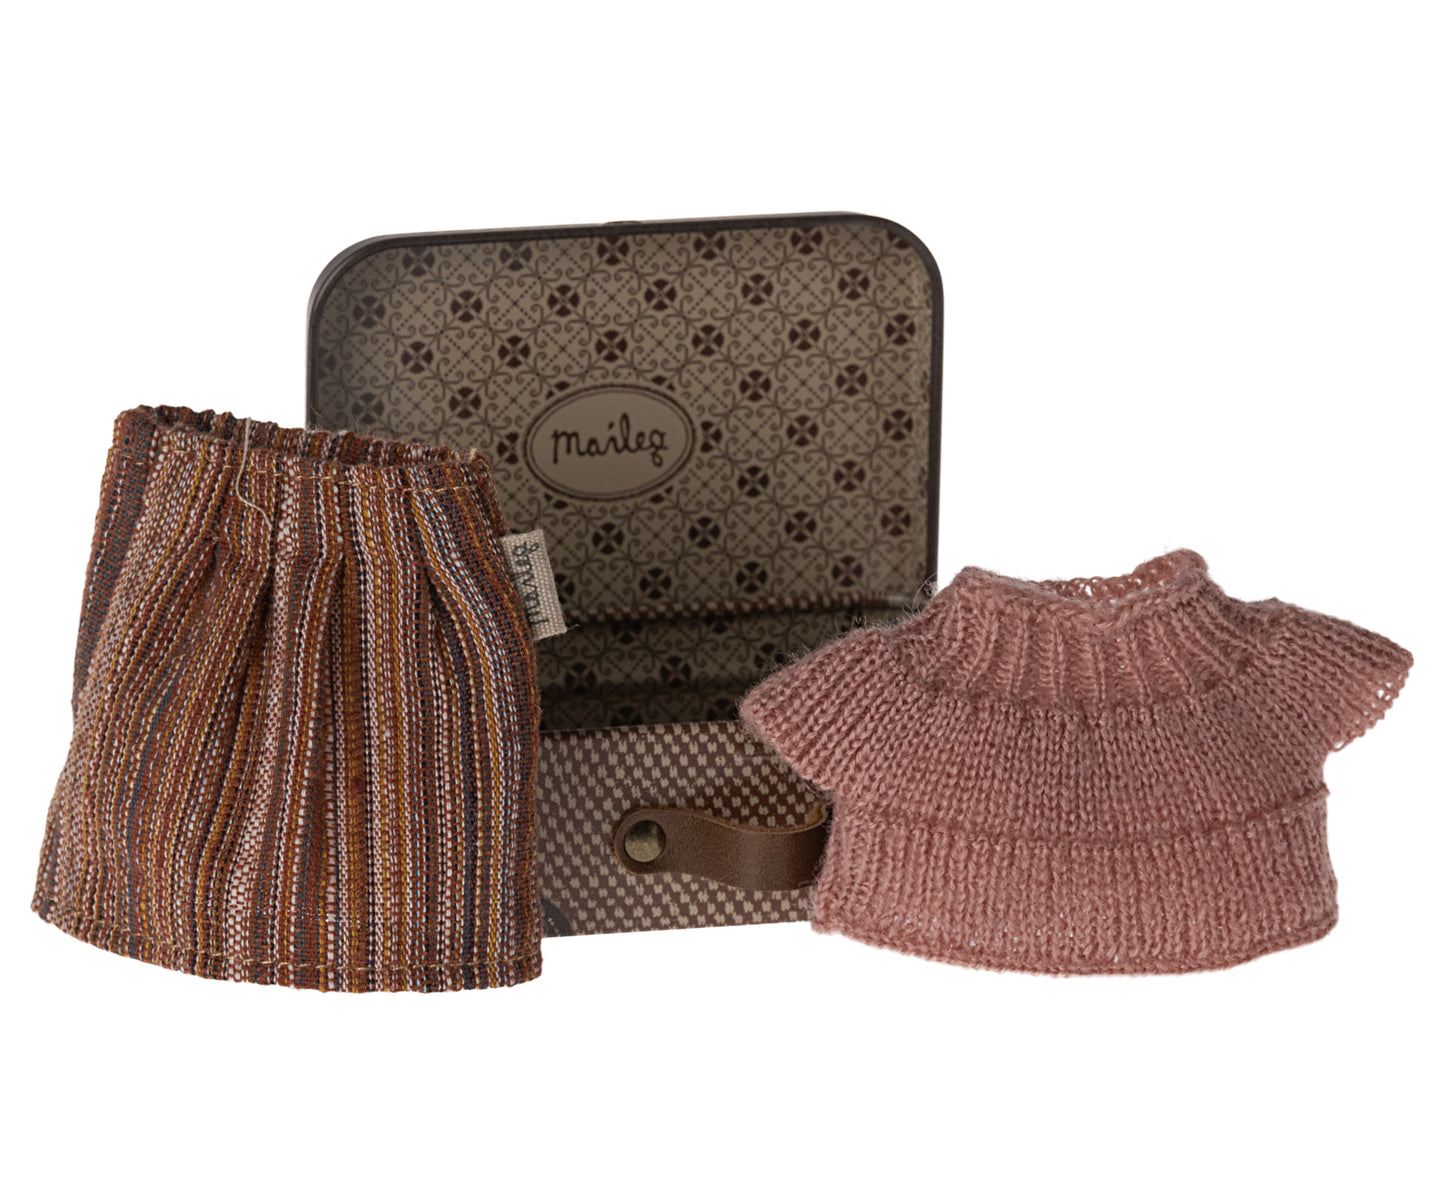 *PRE-ORDER* - Maileg Knitted Blouse & Skirt In Suitcase, Grandma Mouse - *ESTIMATED ARRIVAL EARLY APRIL 2024*